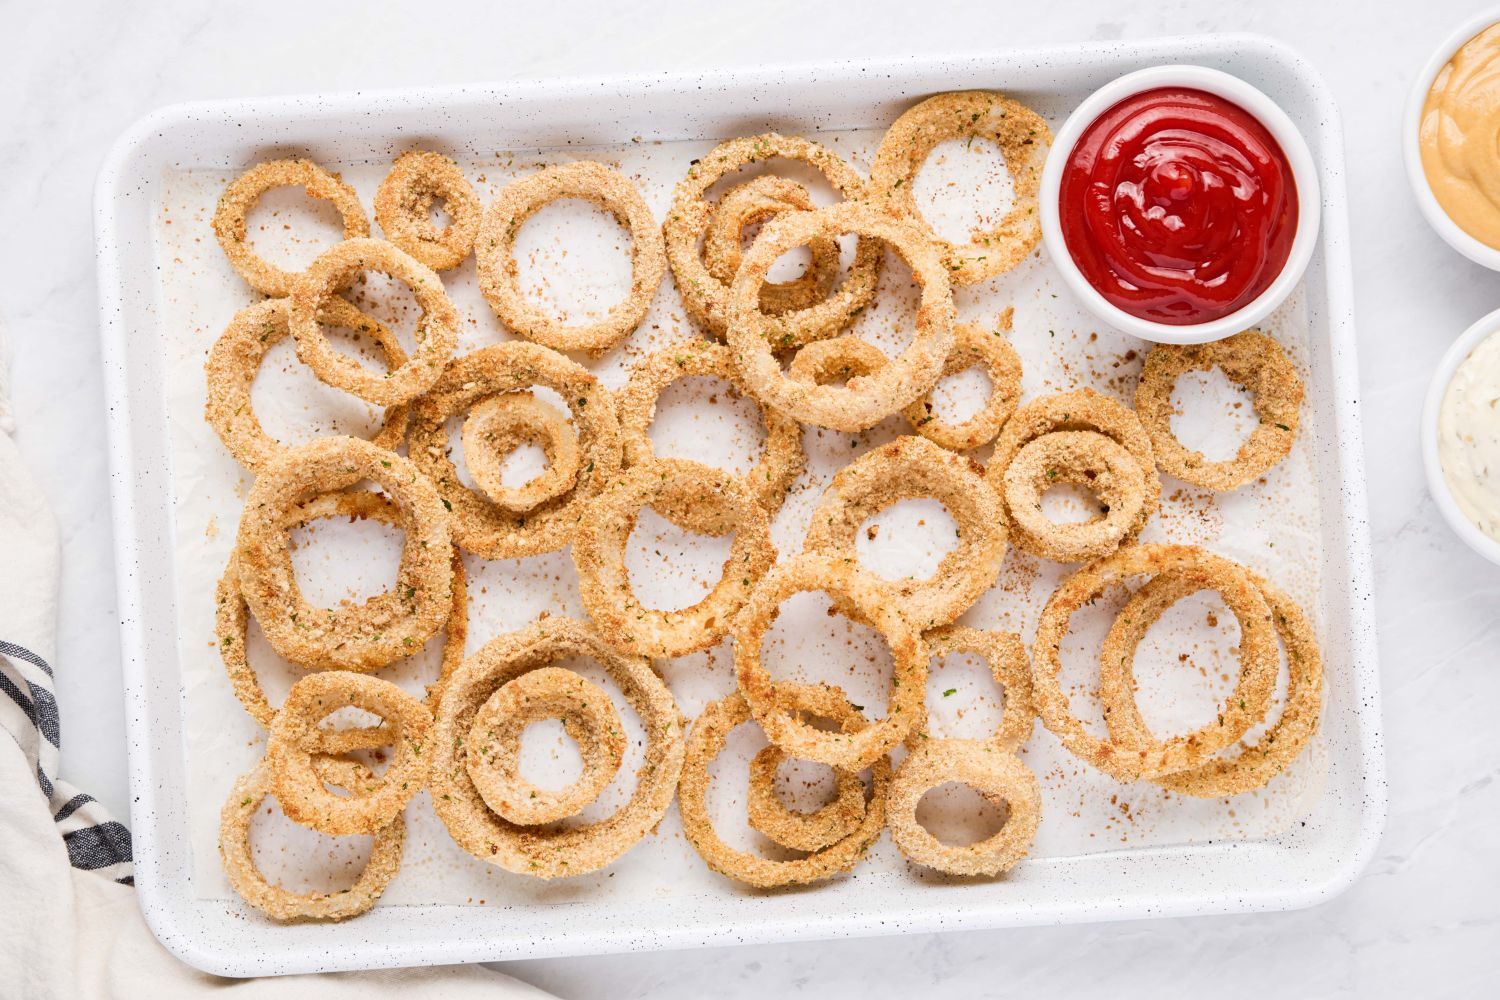 Baked onion rings with a golden brown breadcrumb coating on a baking sheet with ketchup on the side.